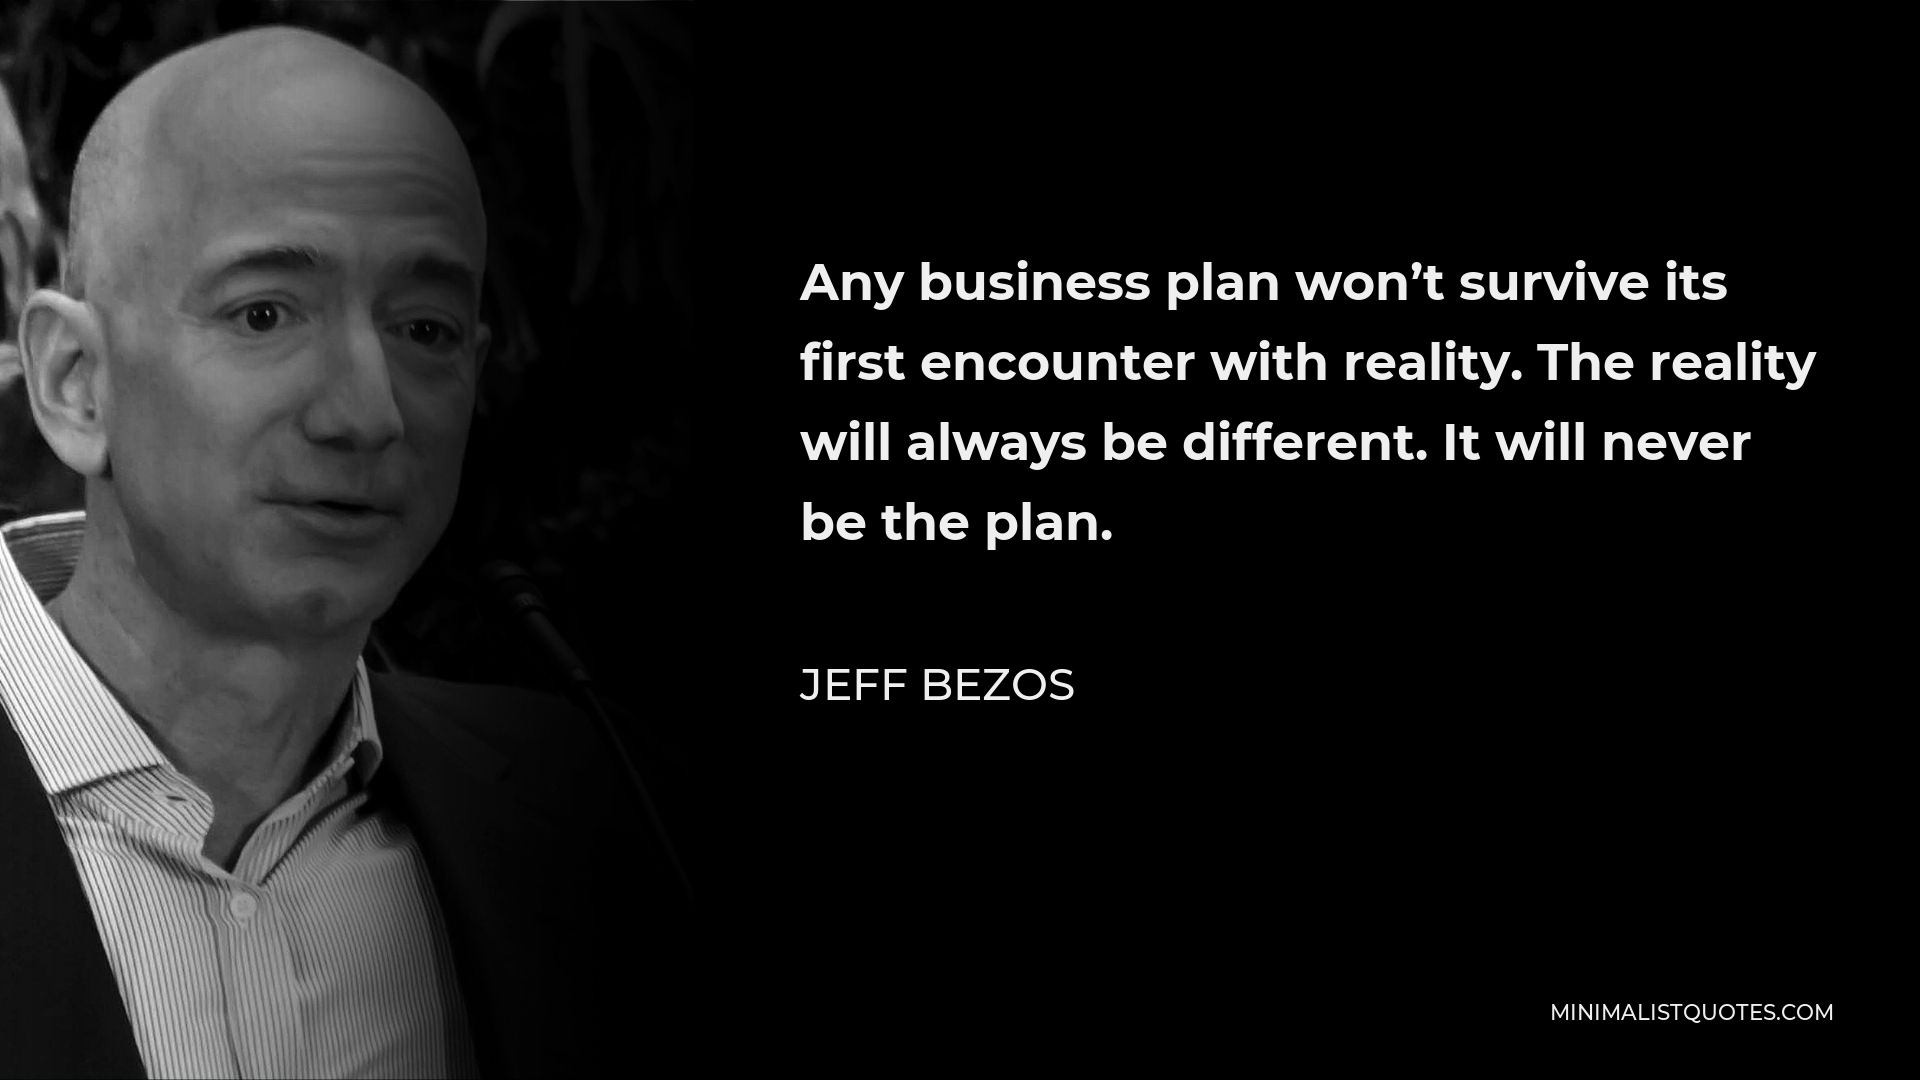 Jeff Bezos Quote - Any business plan won’t survive its first encounter with reality. The reality will always be different. It will never be the plan.